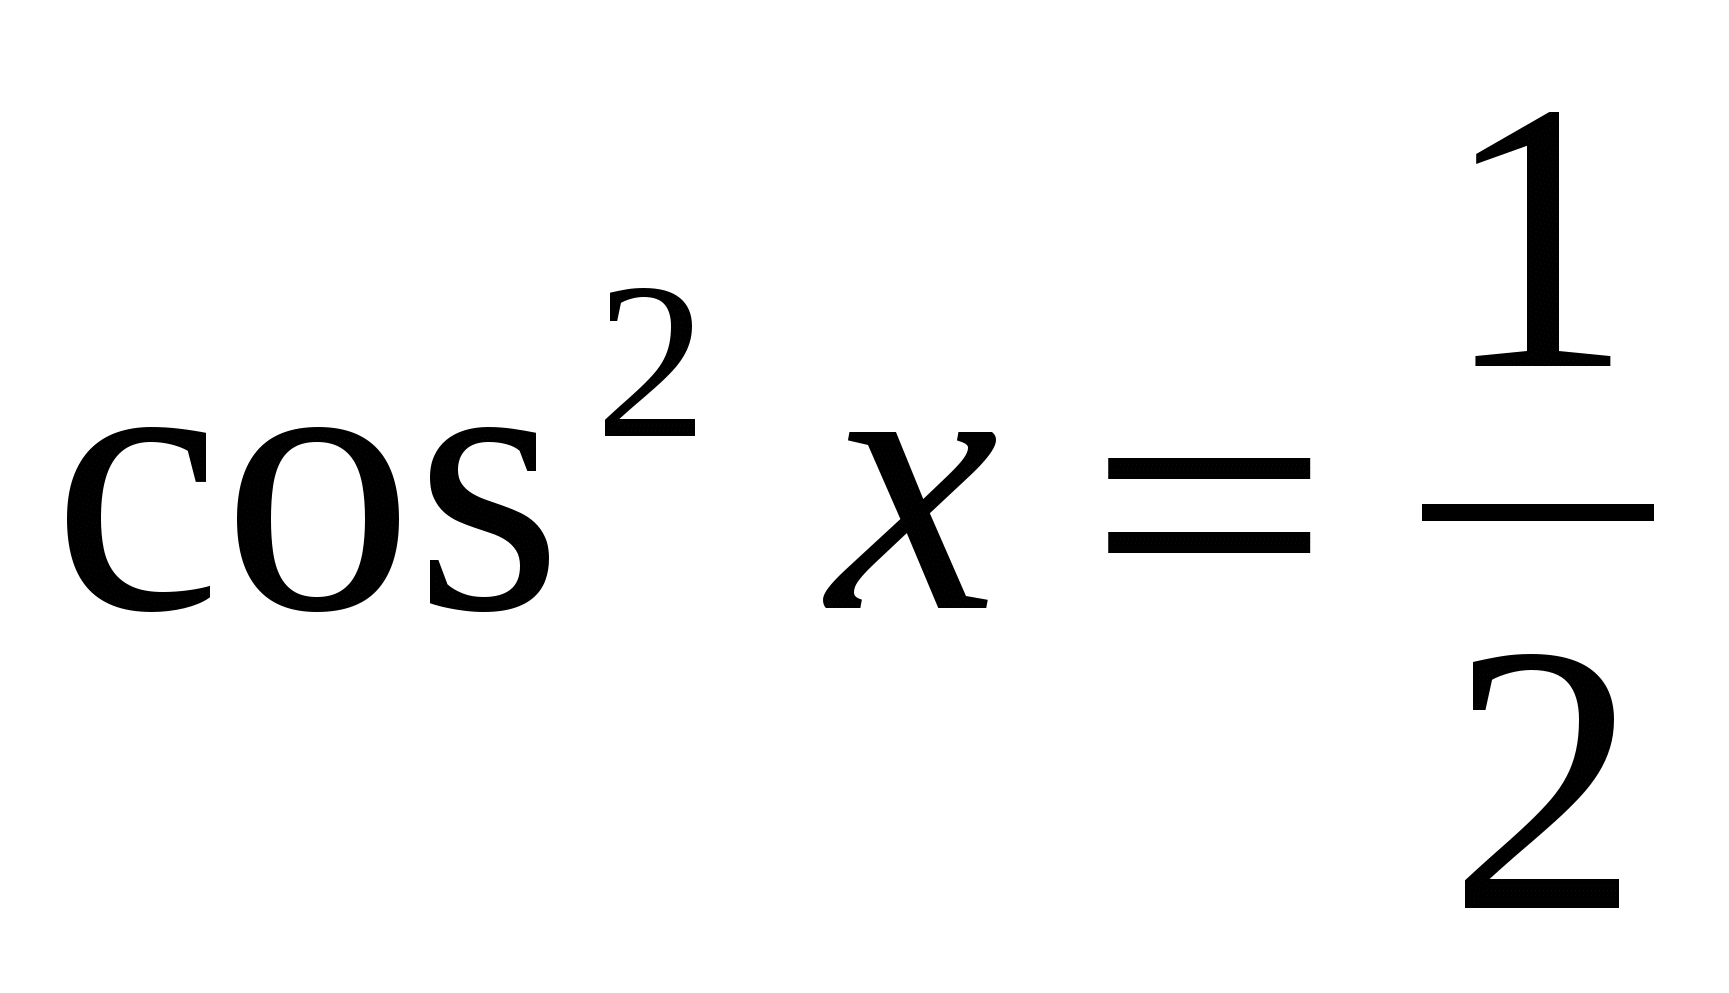 First co. 1-Cos2x. Cos2x=1/2. 2соs2x+1. 2cos^2-1.